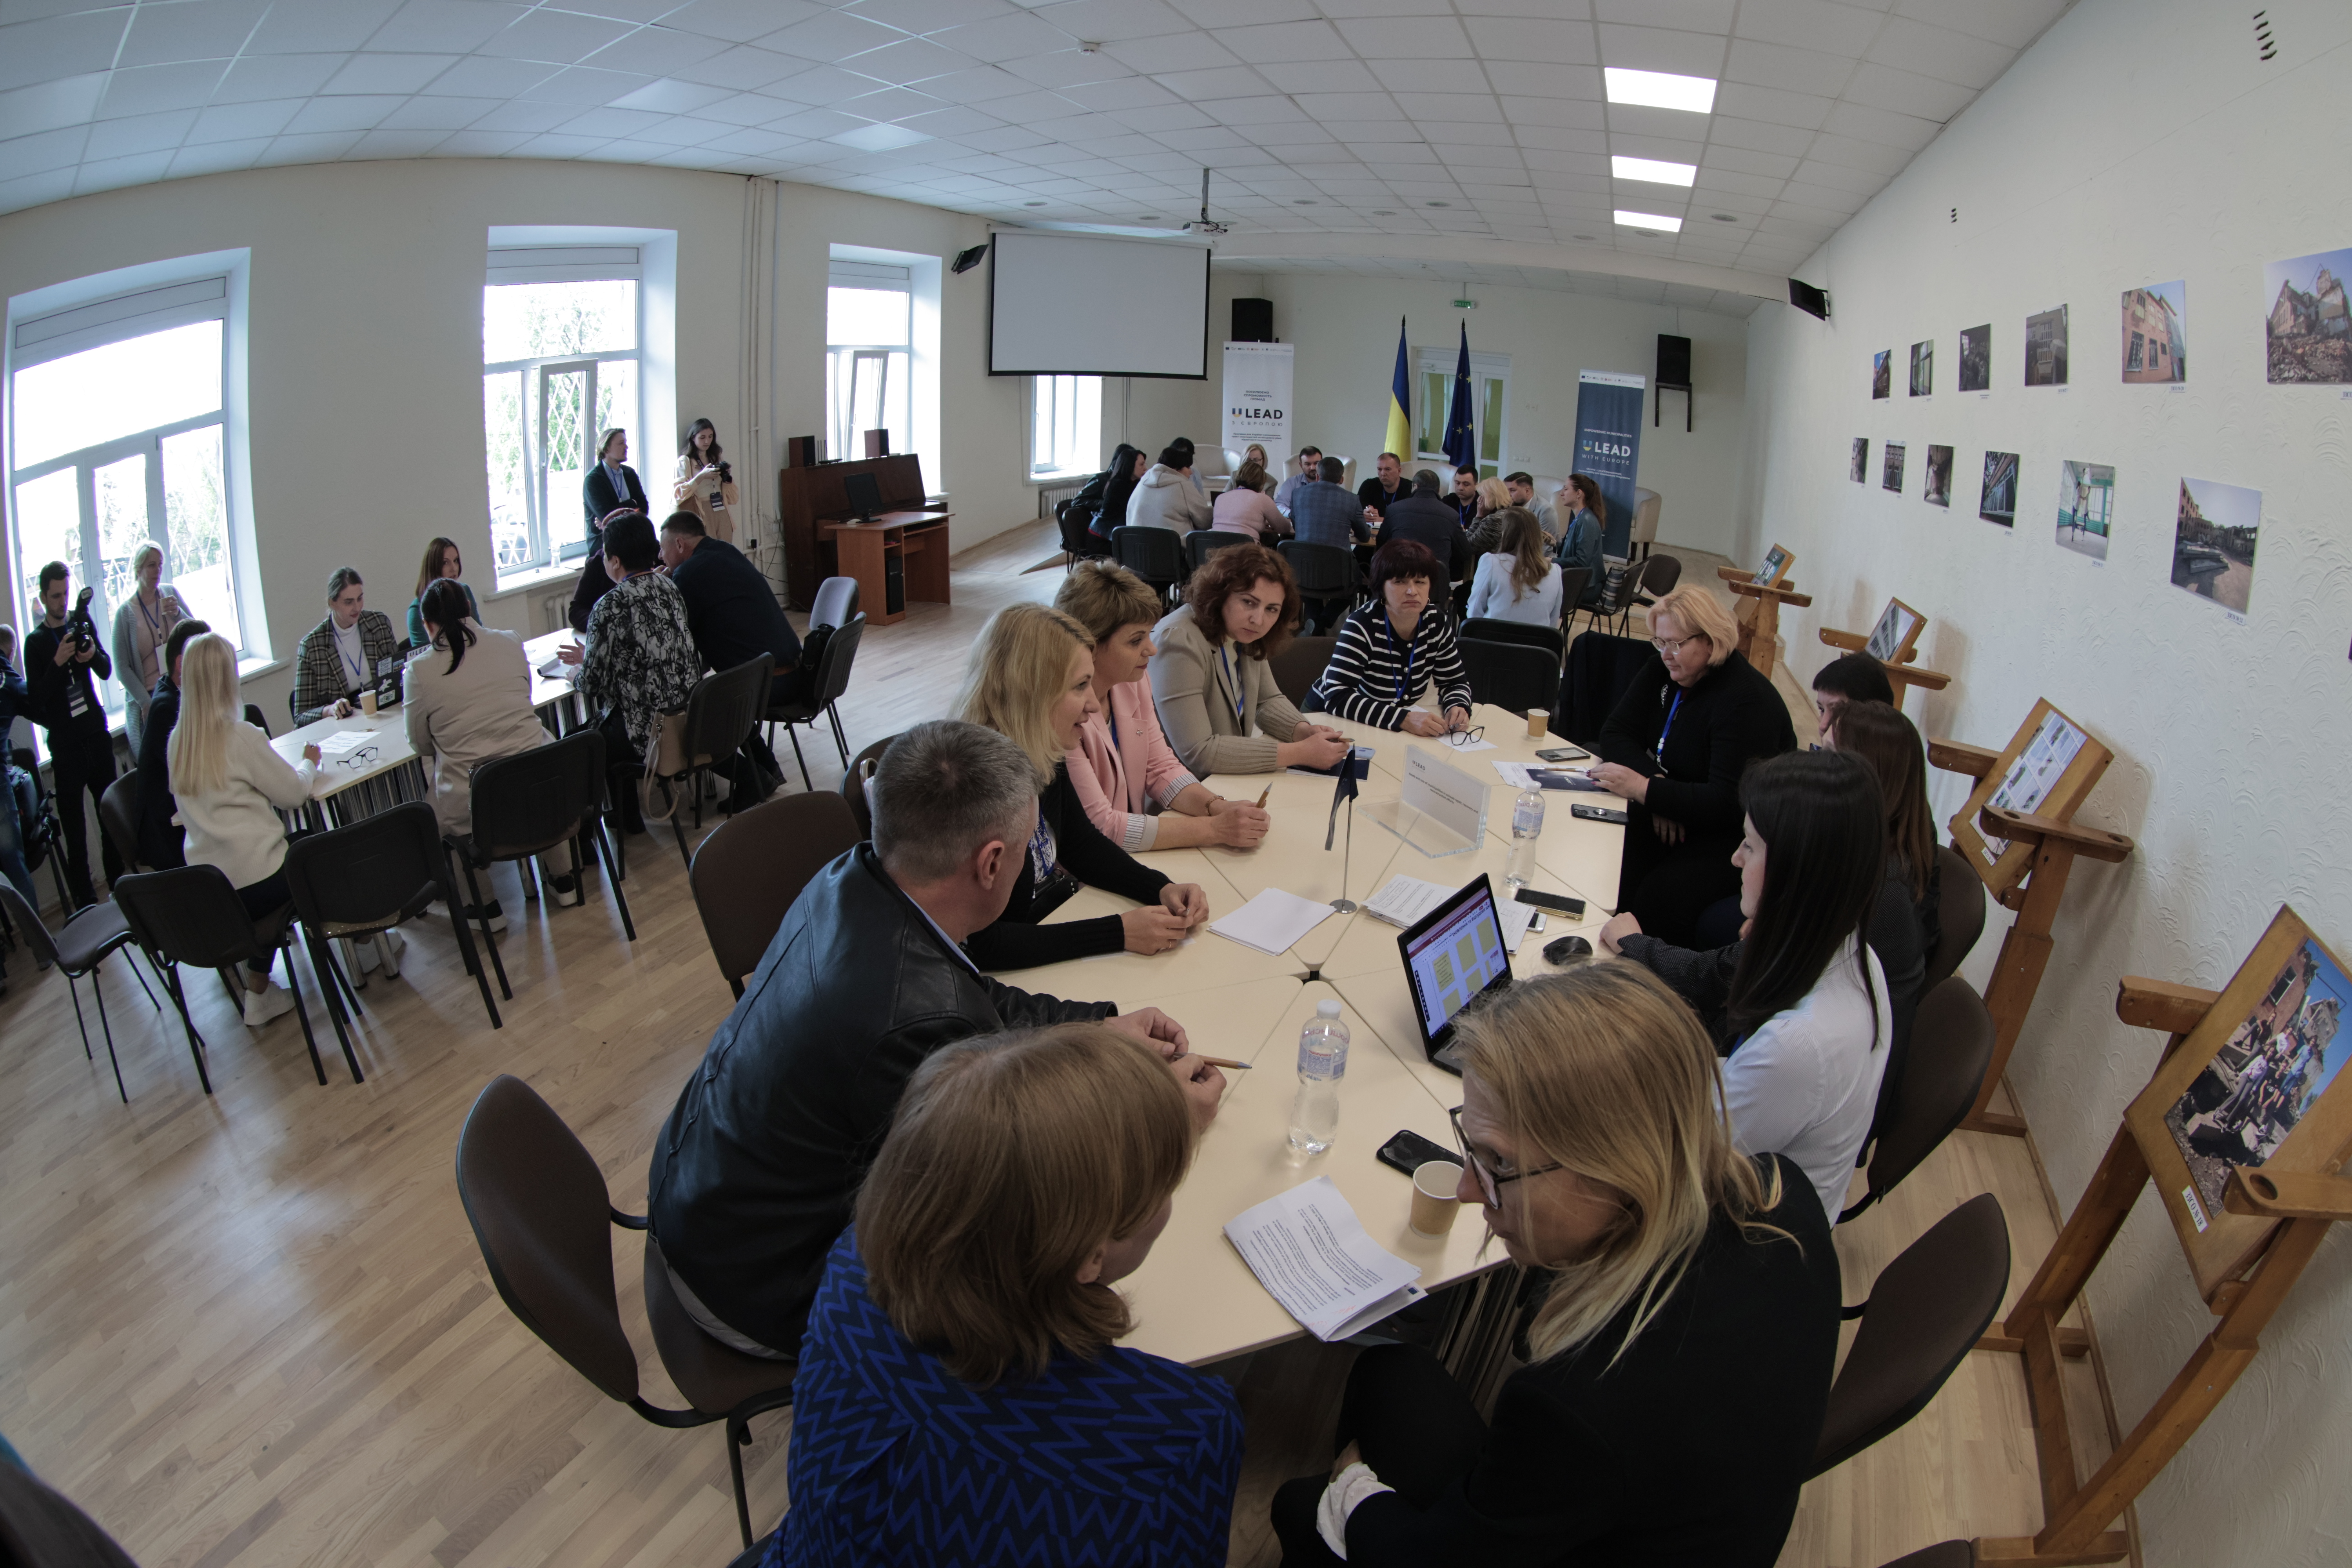 Workshop “Restoring Access to Education: Dialogue on the Role of Ukrainian Municipalities in Repair, Recovery and Reconstruction”